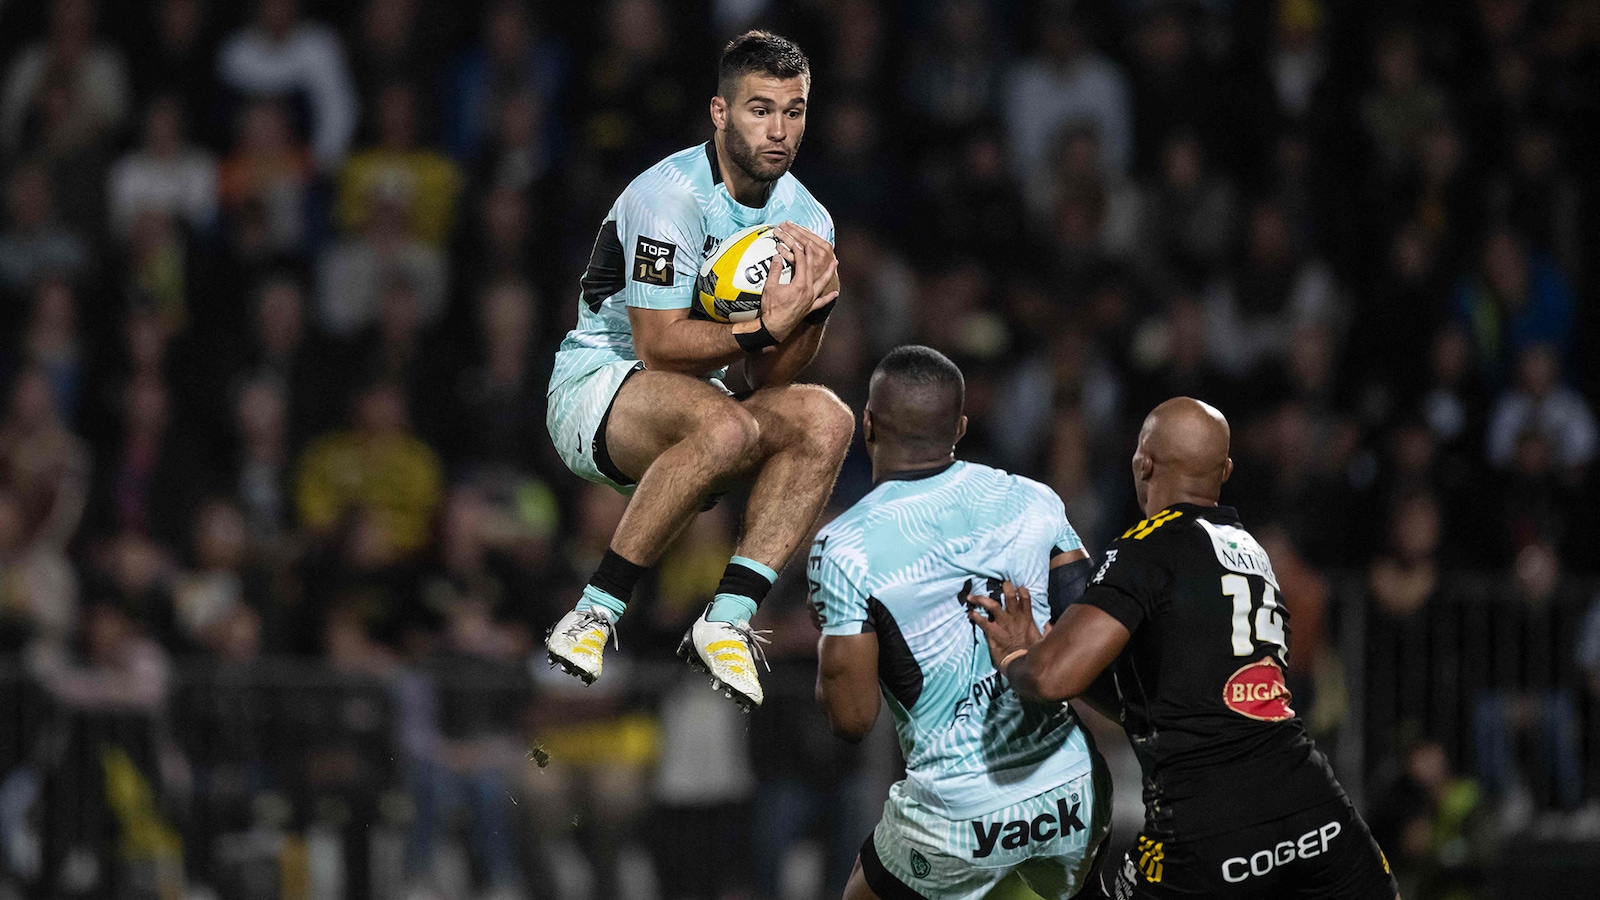 Perpignan Vs Toulouse: How to Watch the Rugby Top 14 Live Stream Online